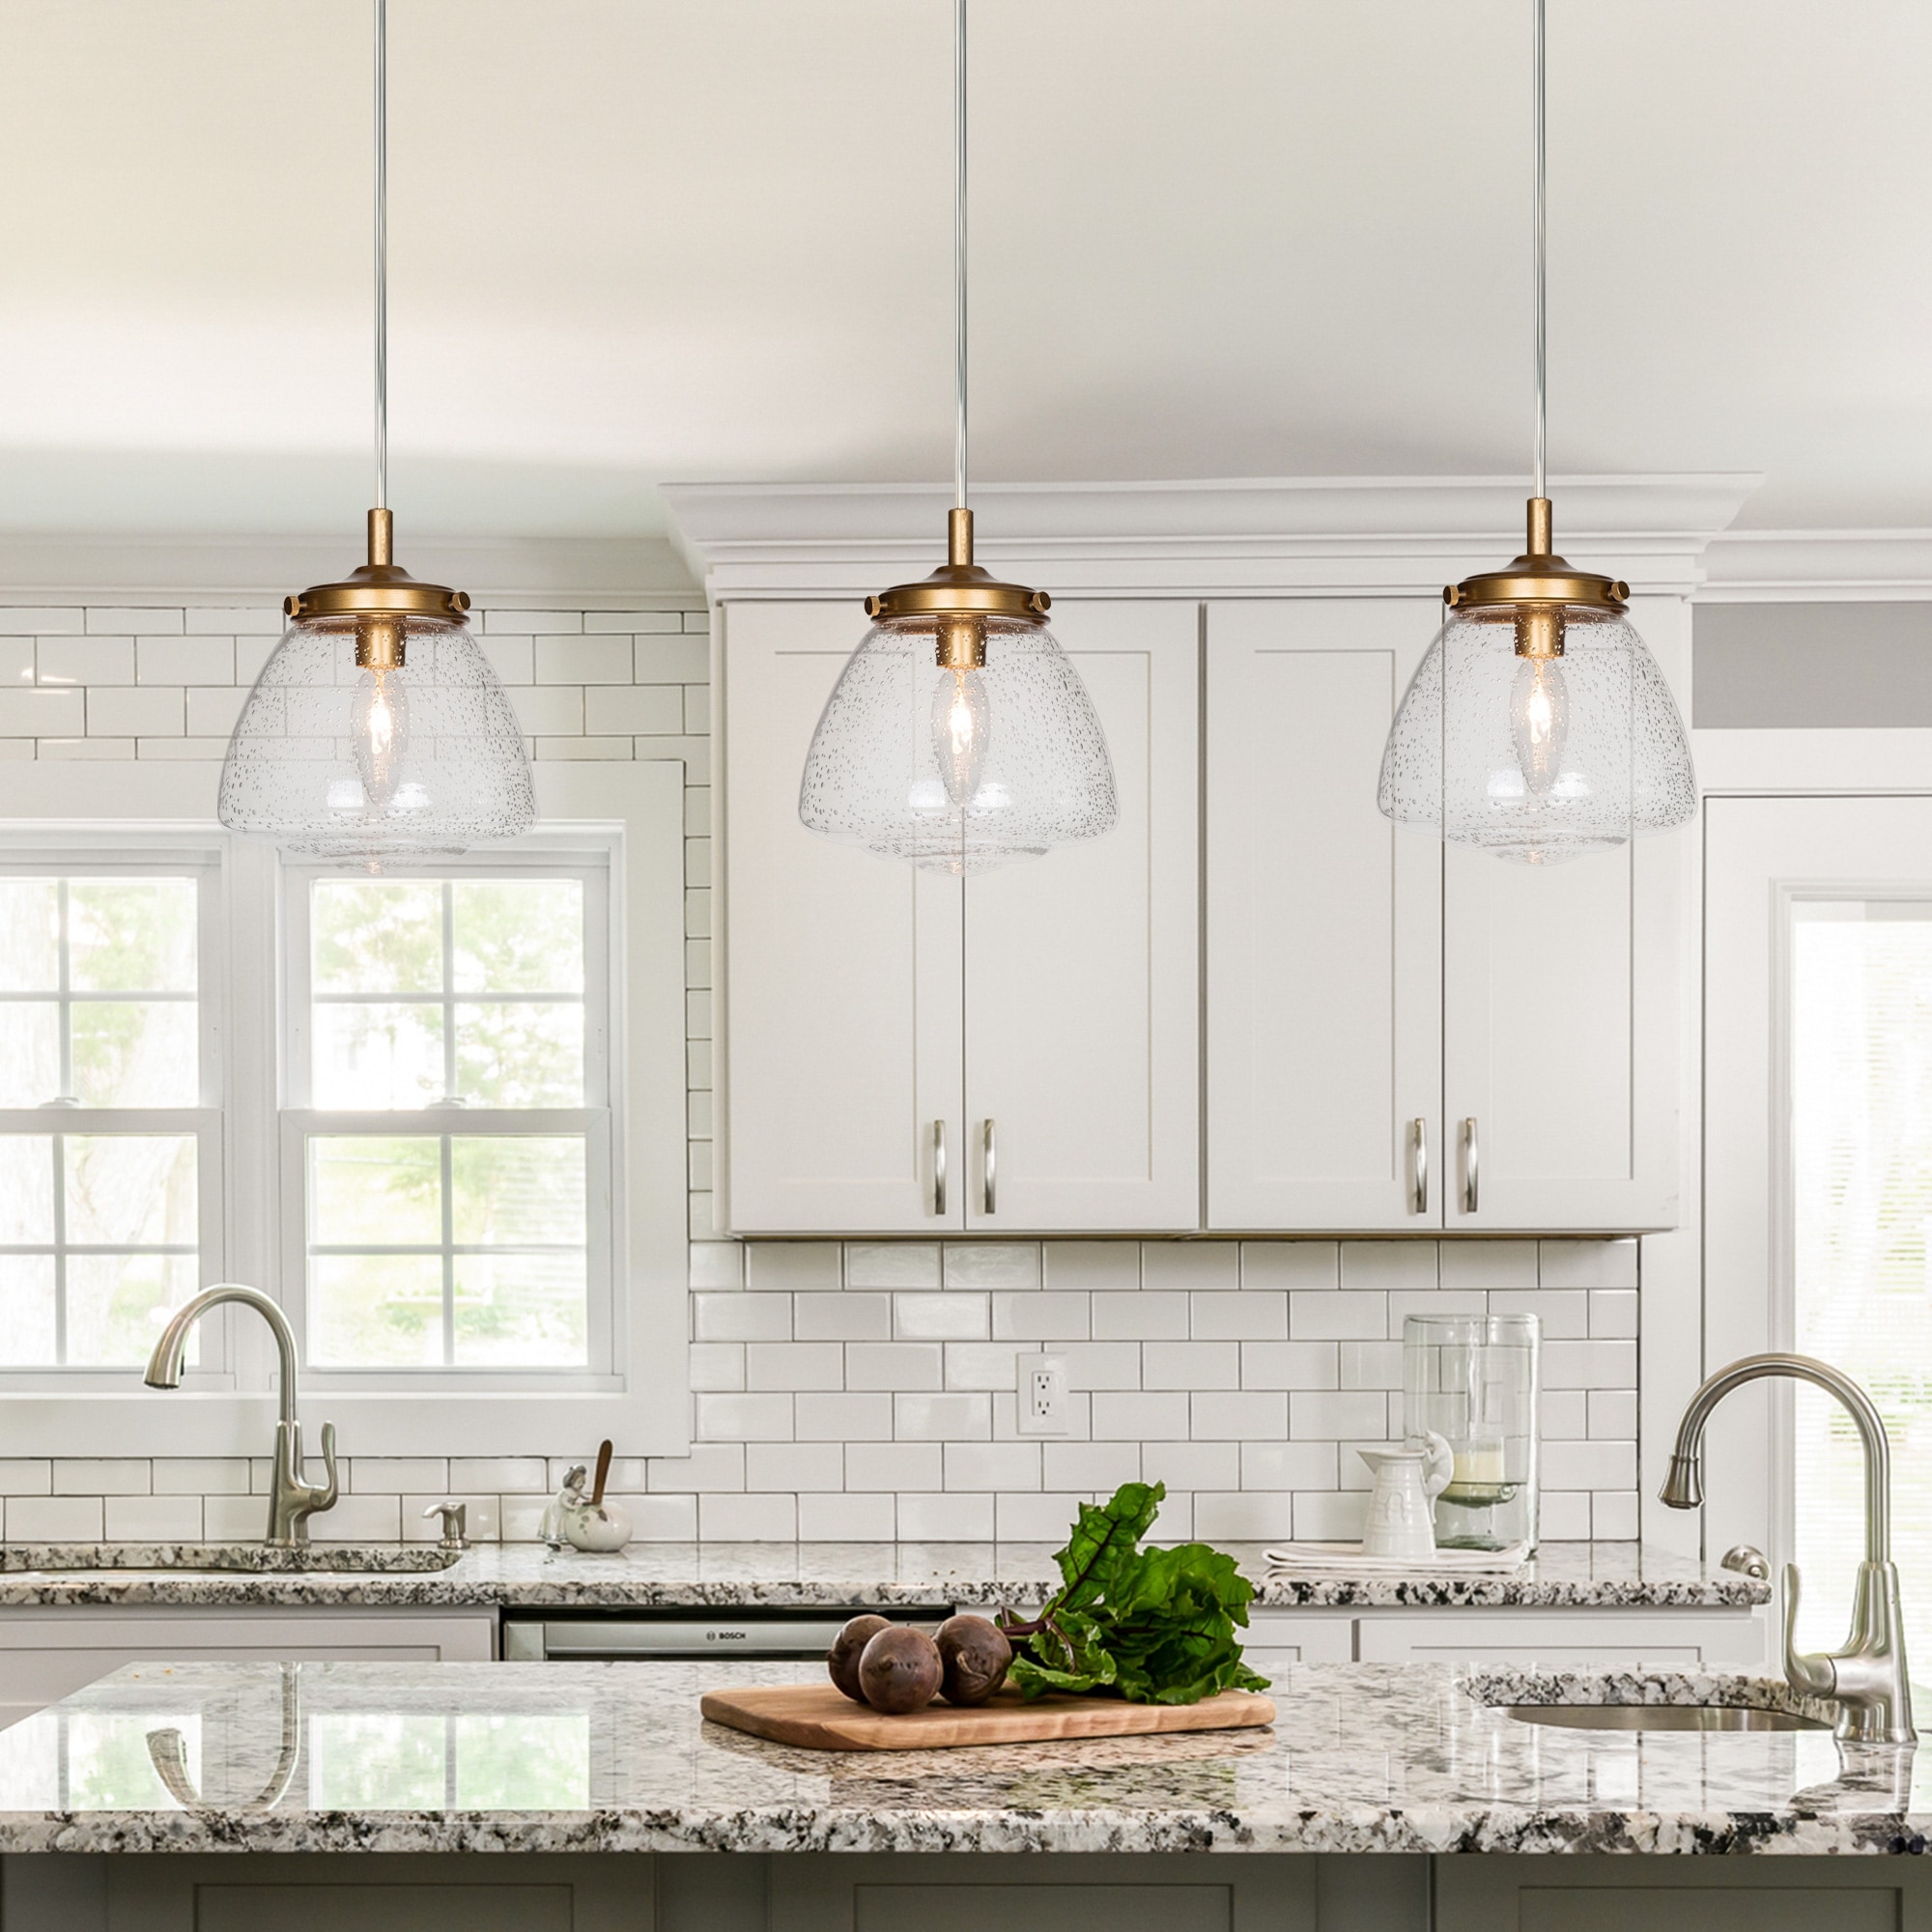 Glass Pendant Lights Over Kitchen Island – Things In The Kitchen